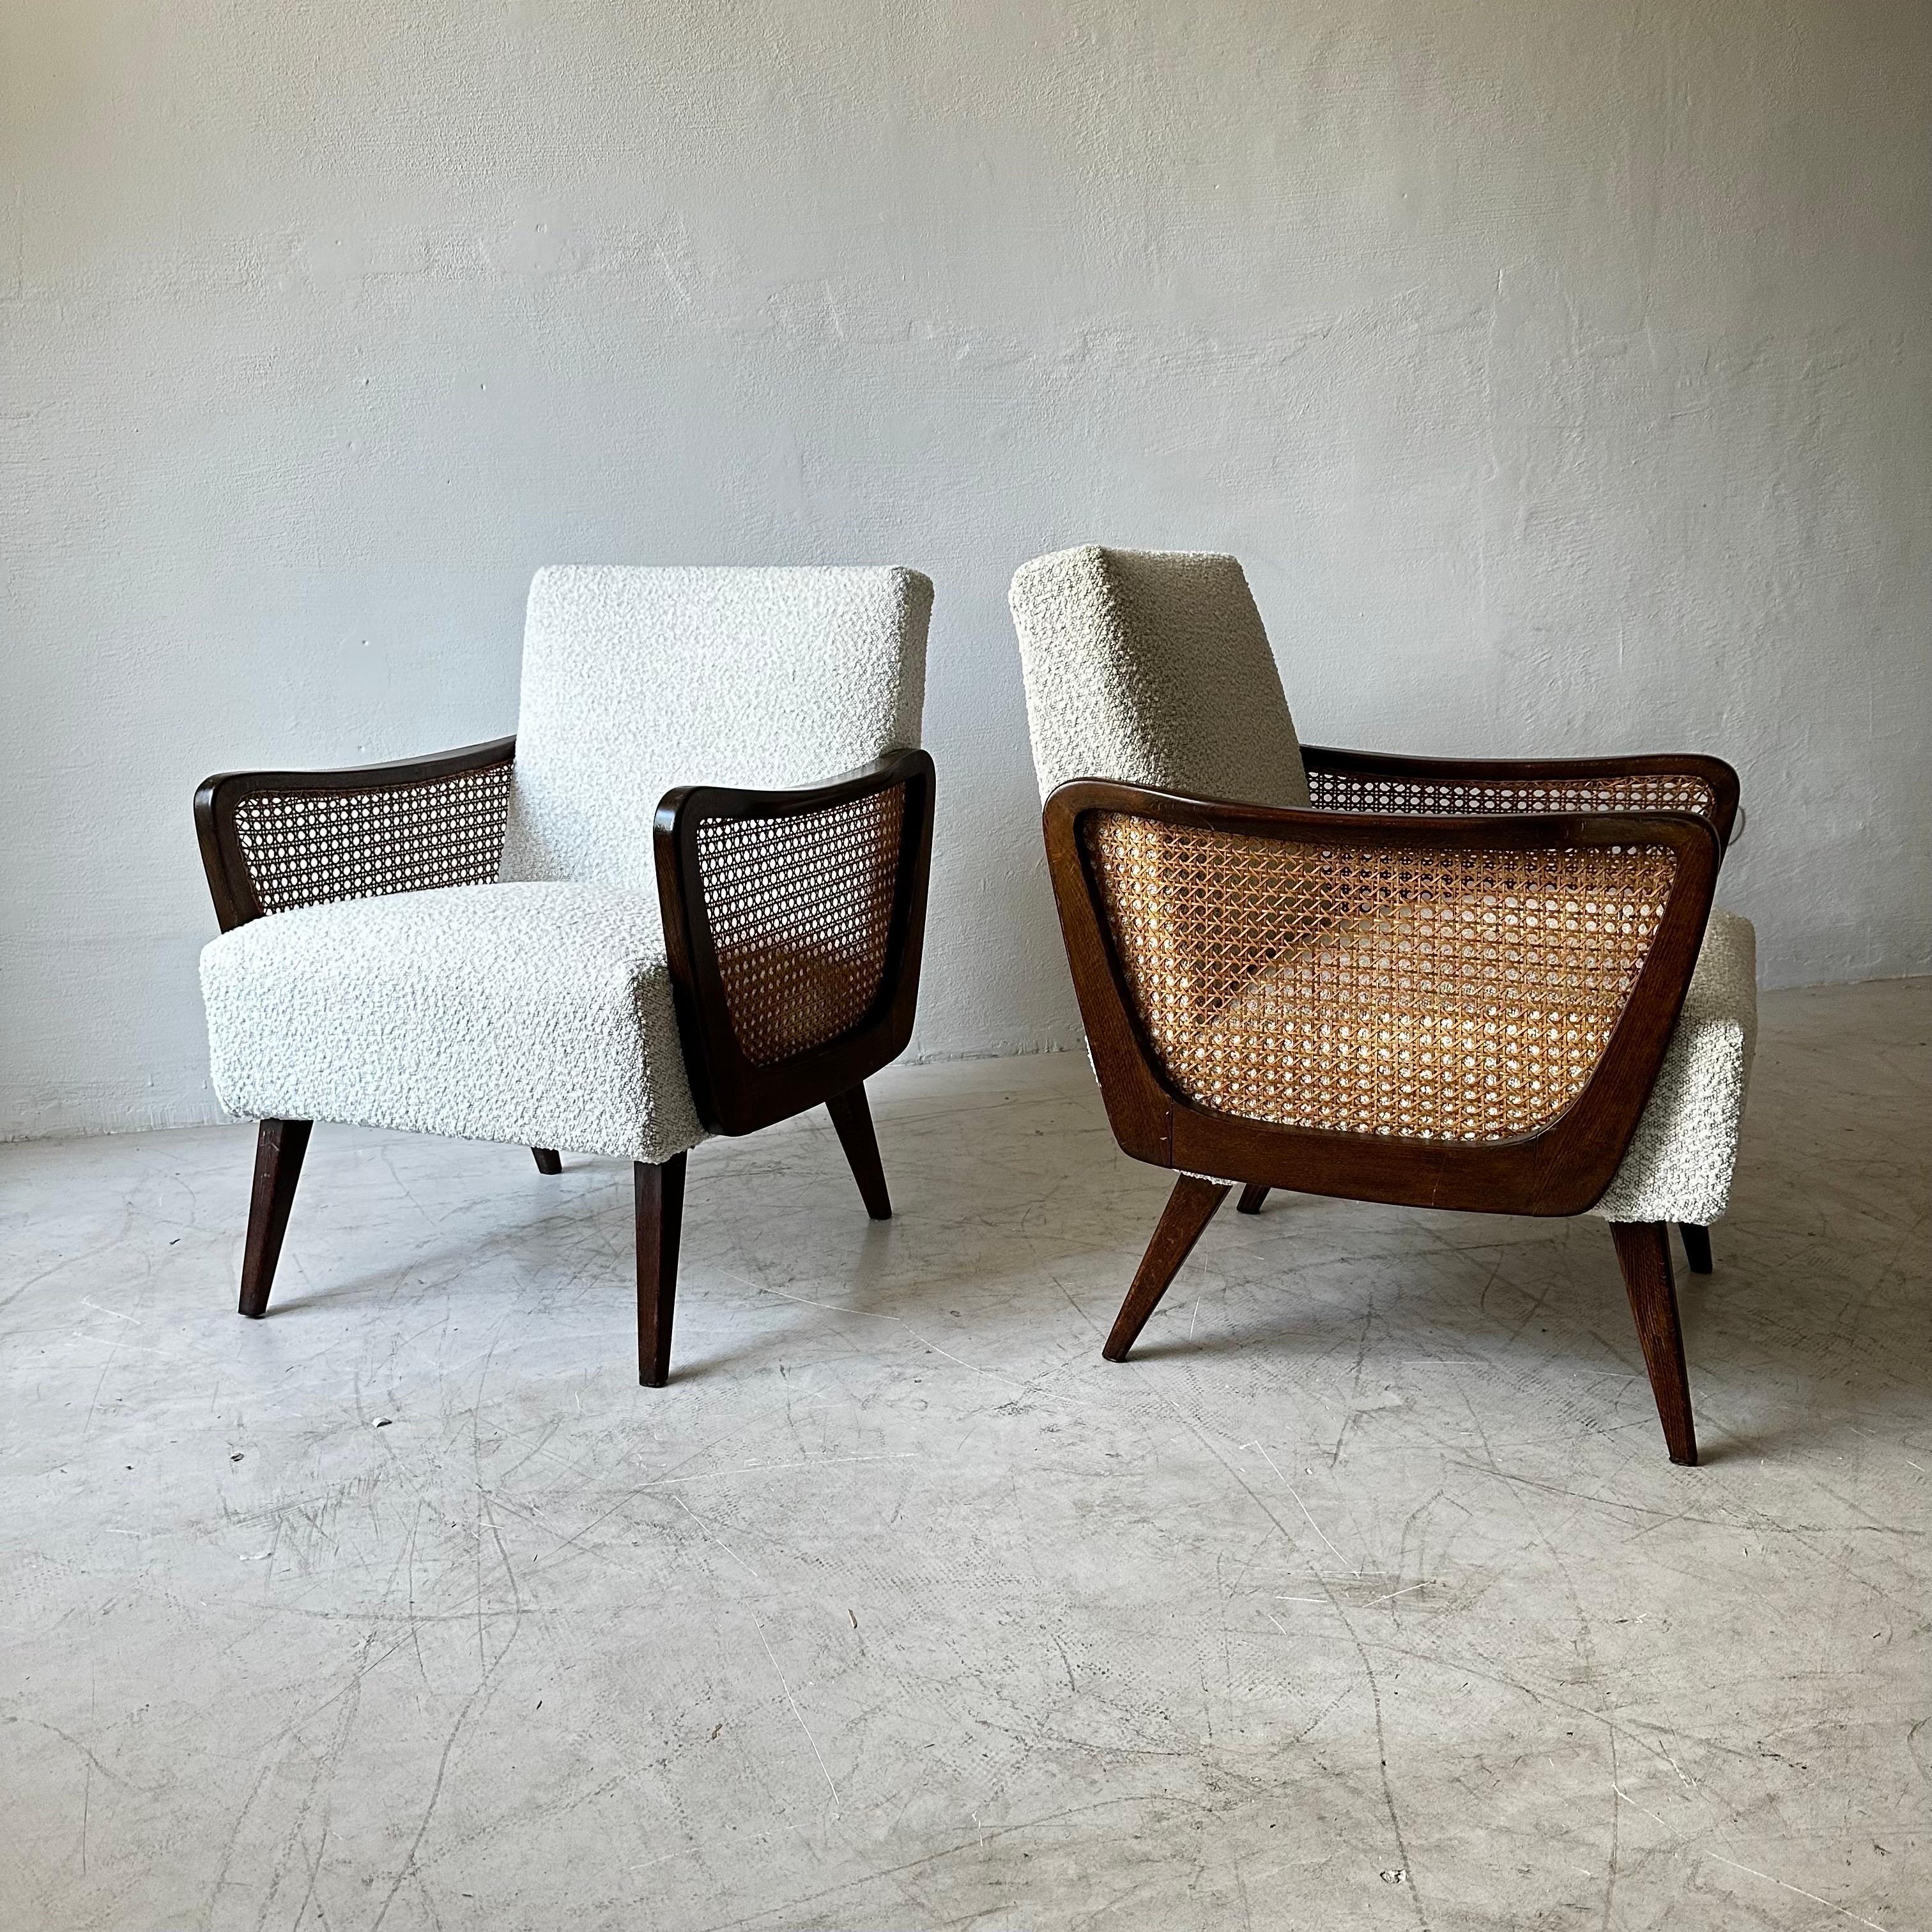 Bouclé Austrian Arm Chairs in Boucle and Wicker, 1950s For Sale